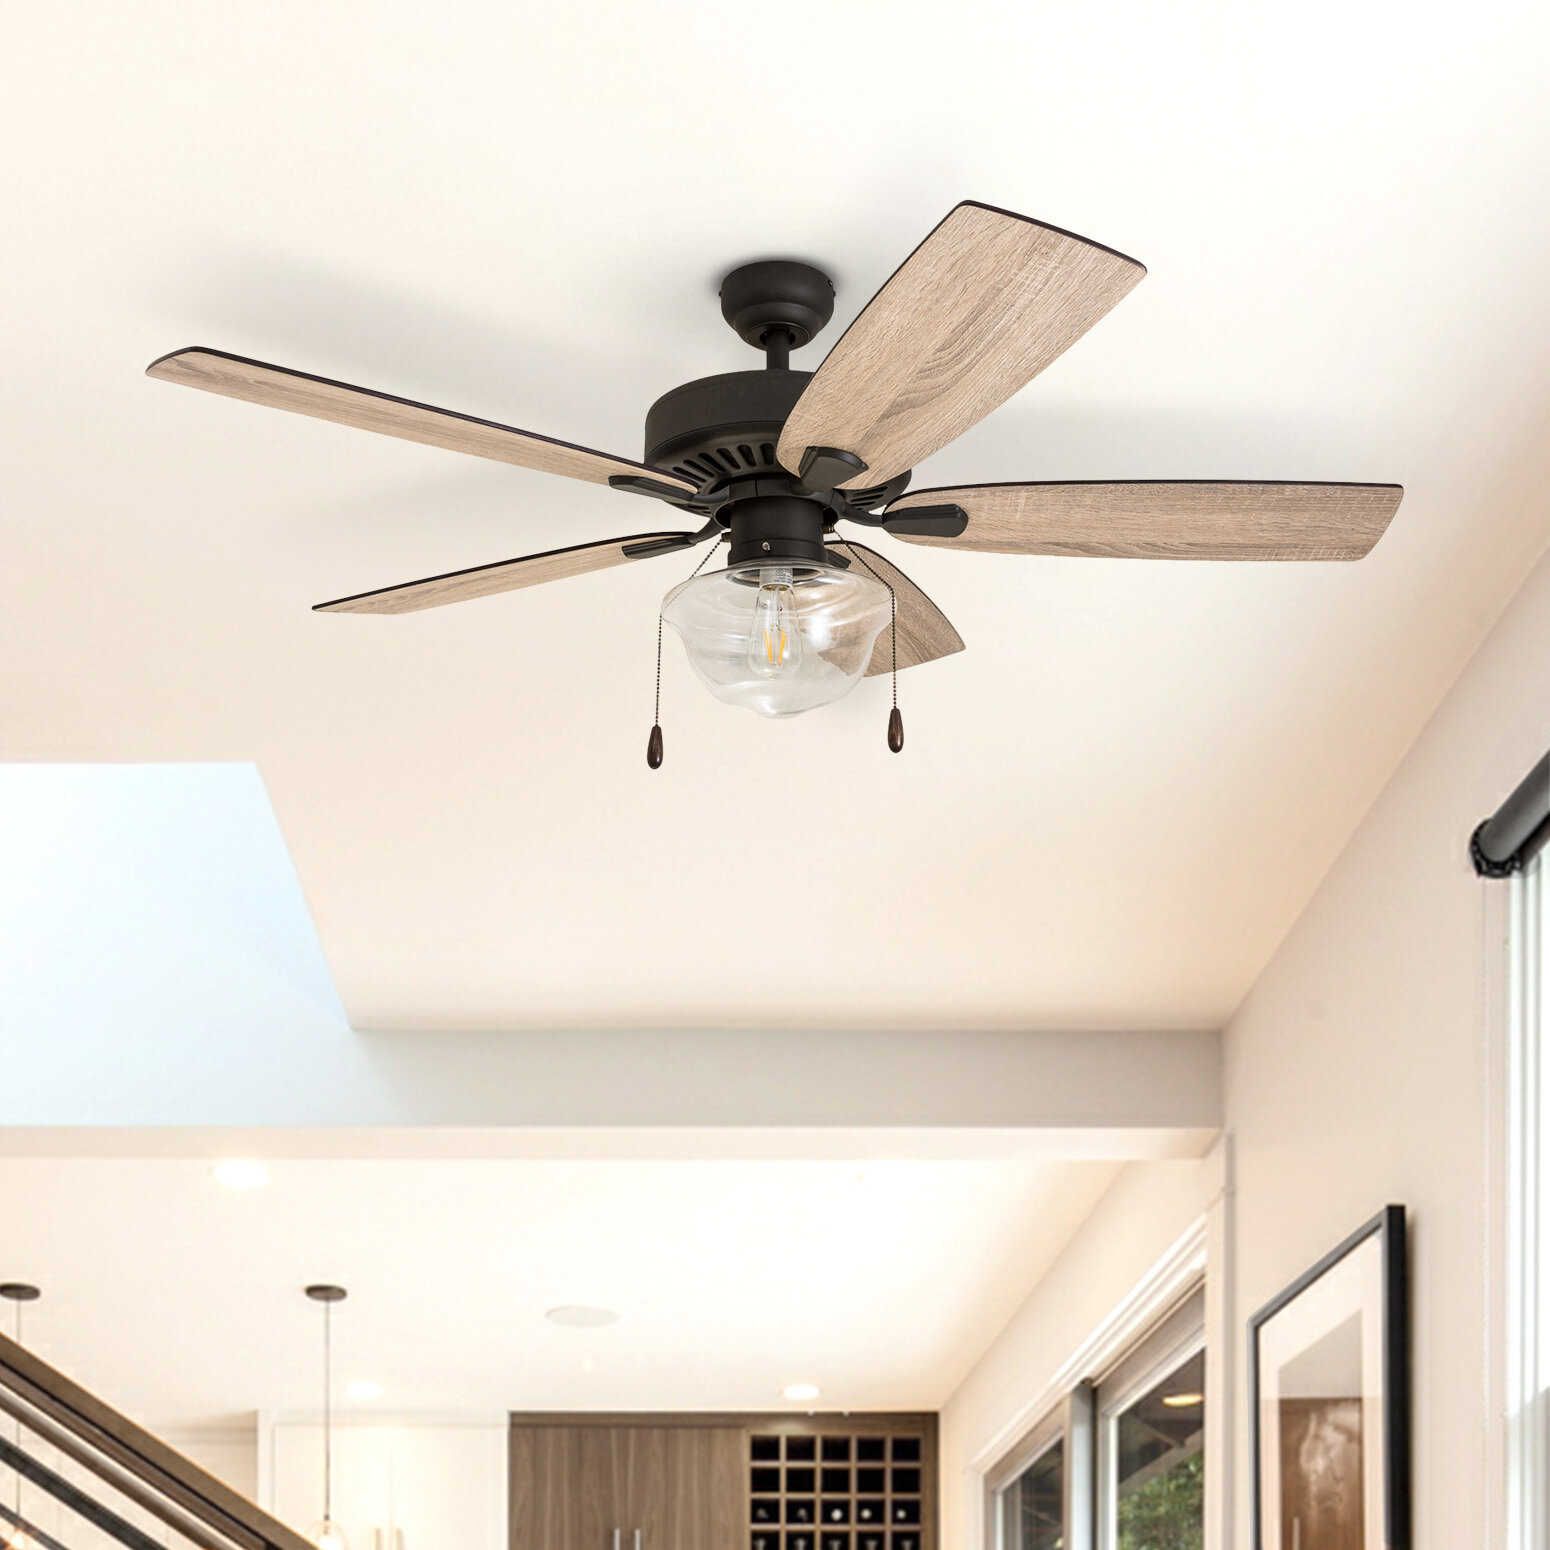 Laurel Foundry Modern Farmhouse 52 Culloden 5 Blade Standard Ceiling Fan With Light Kit Included Reviews Wayfair